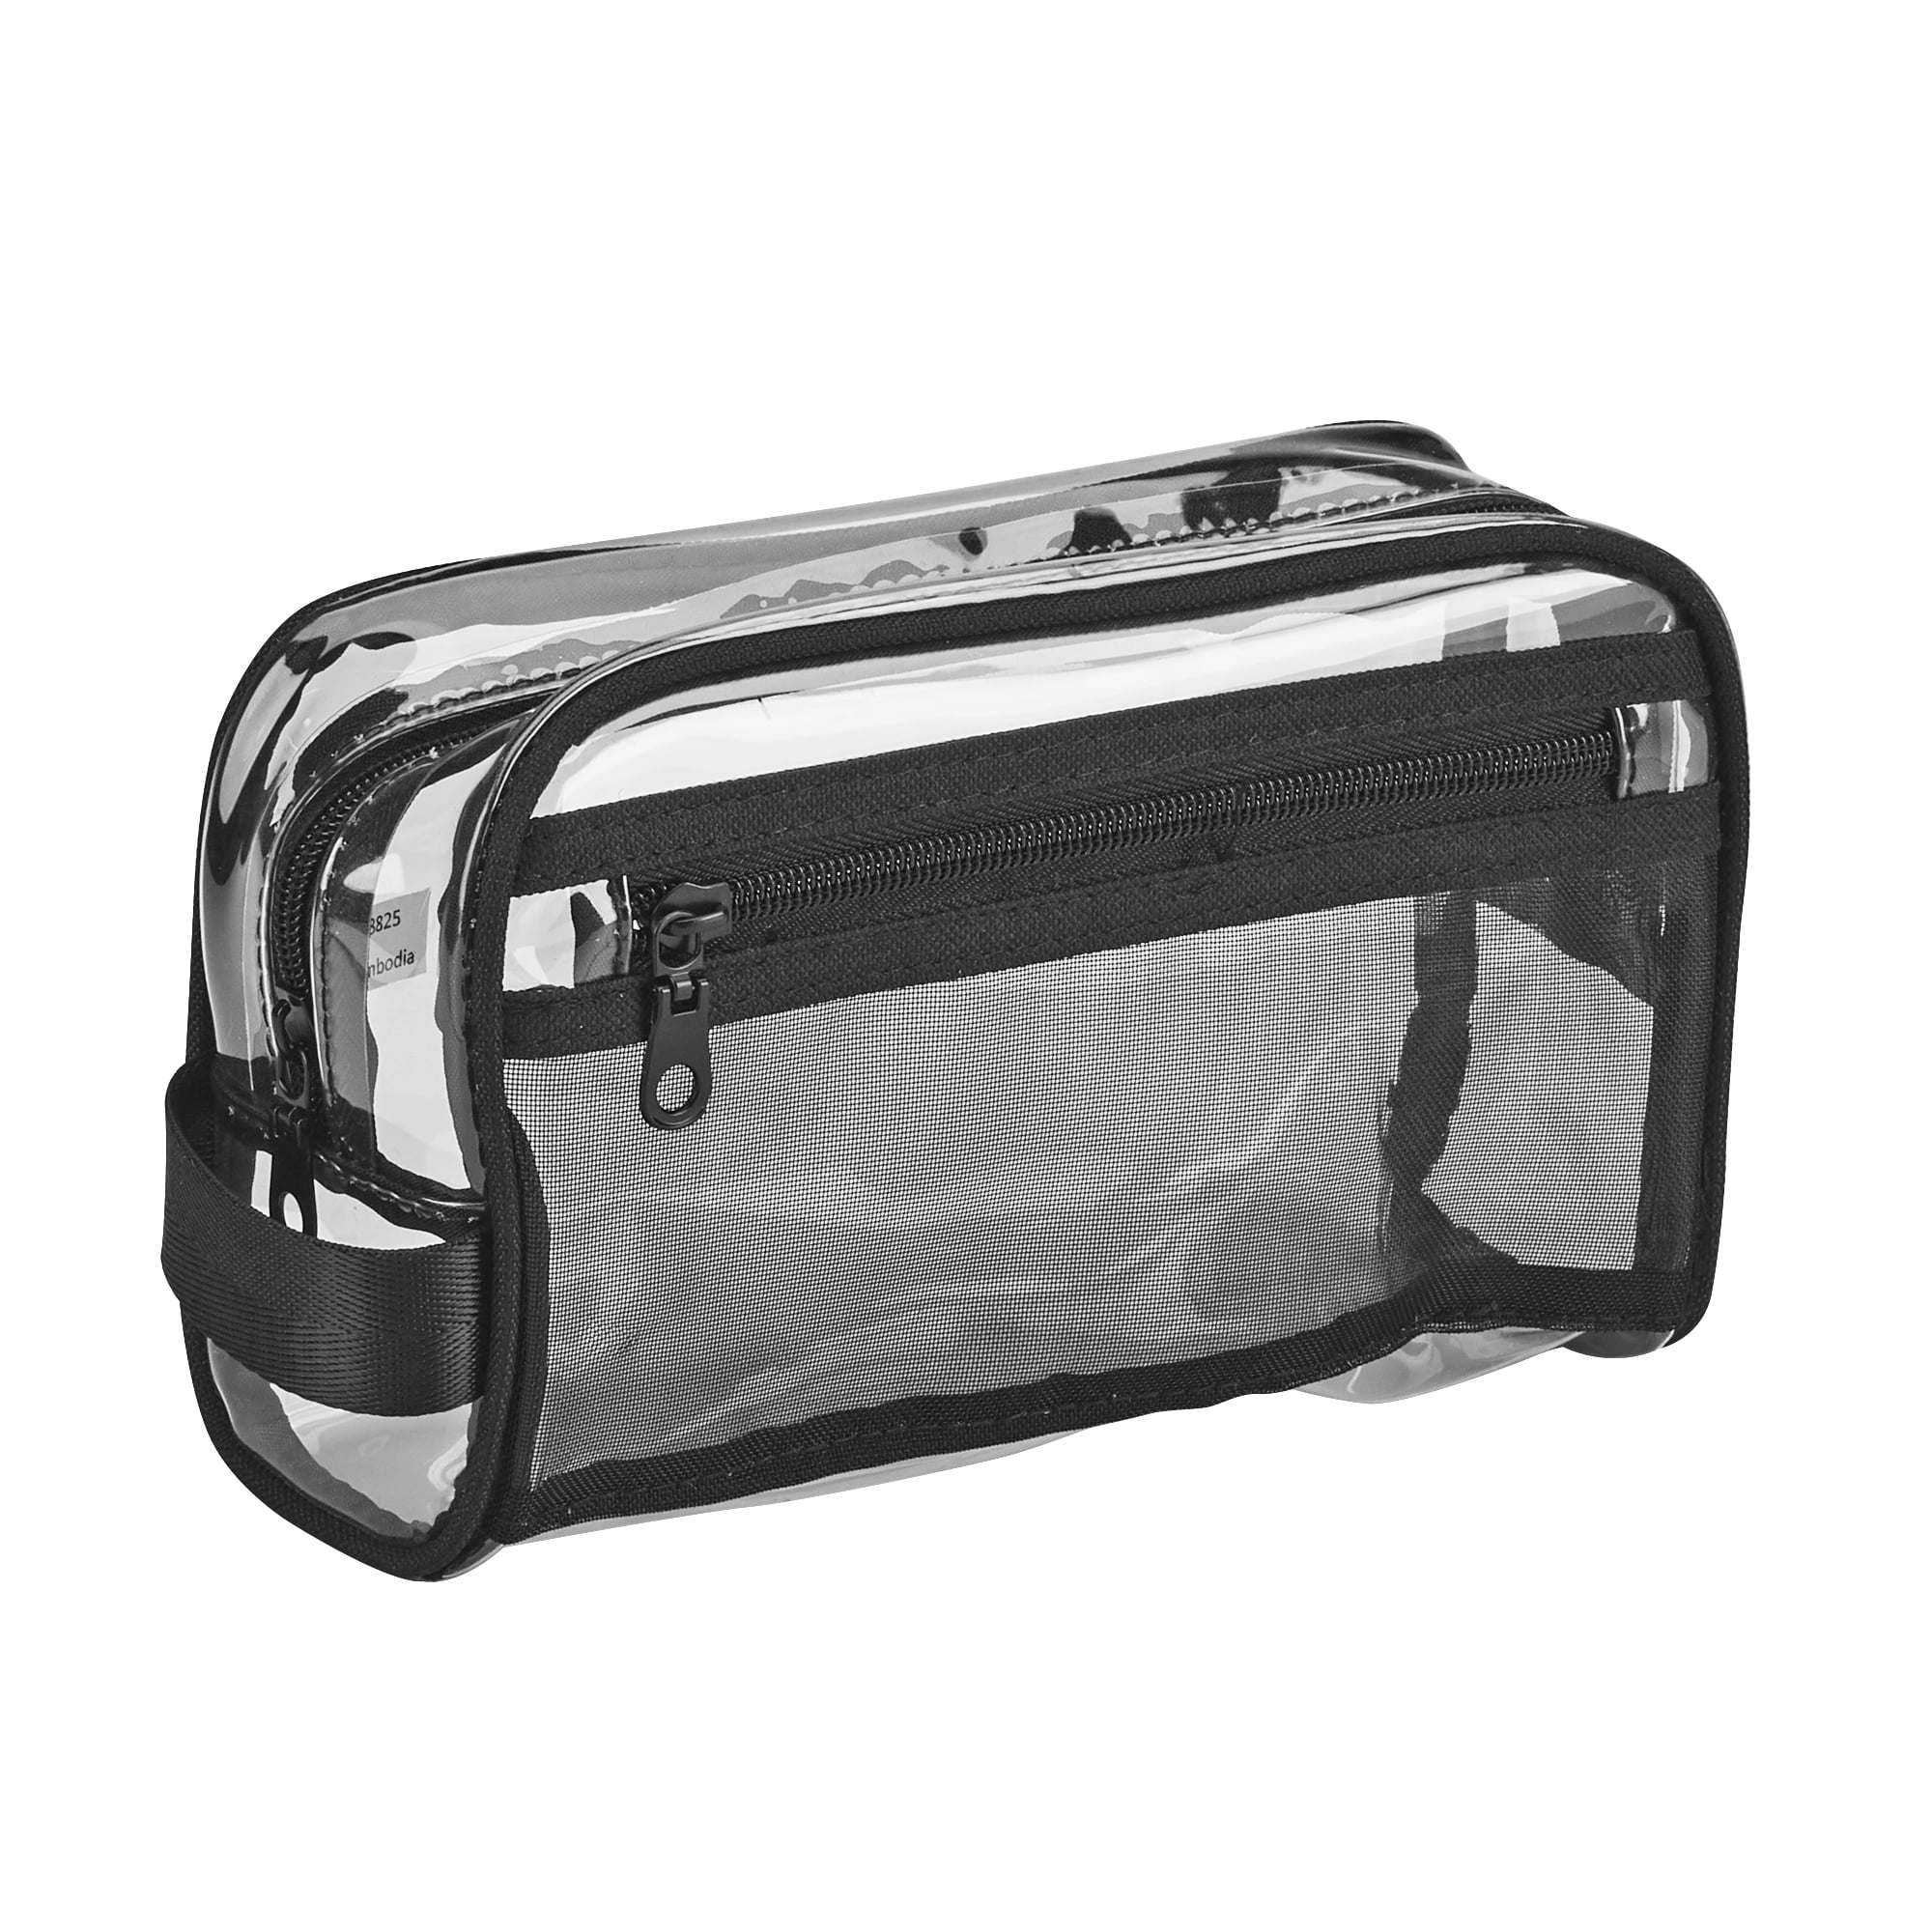 Basics Transparent PVC with Black Webbed Handle & Piping with Easy Access Side Pocket